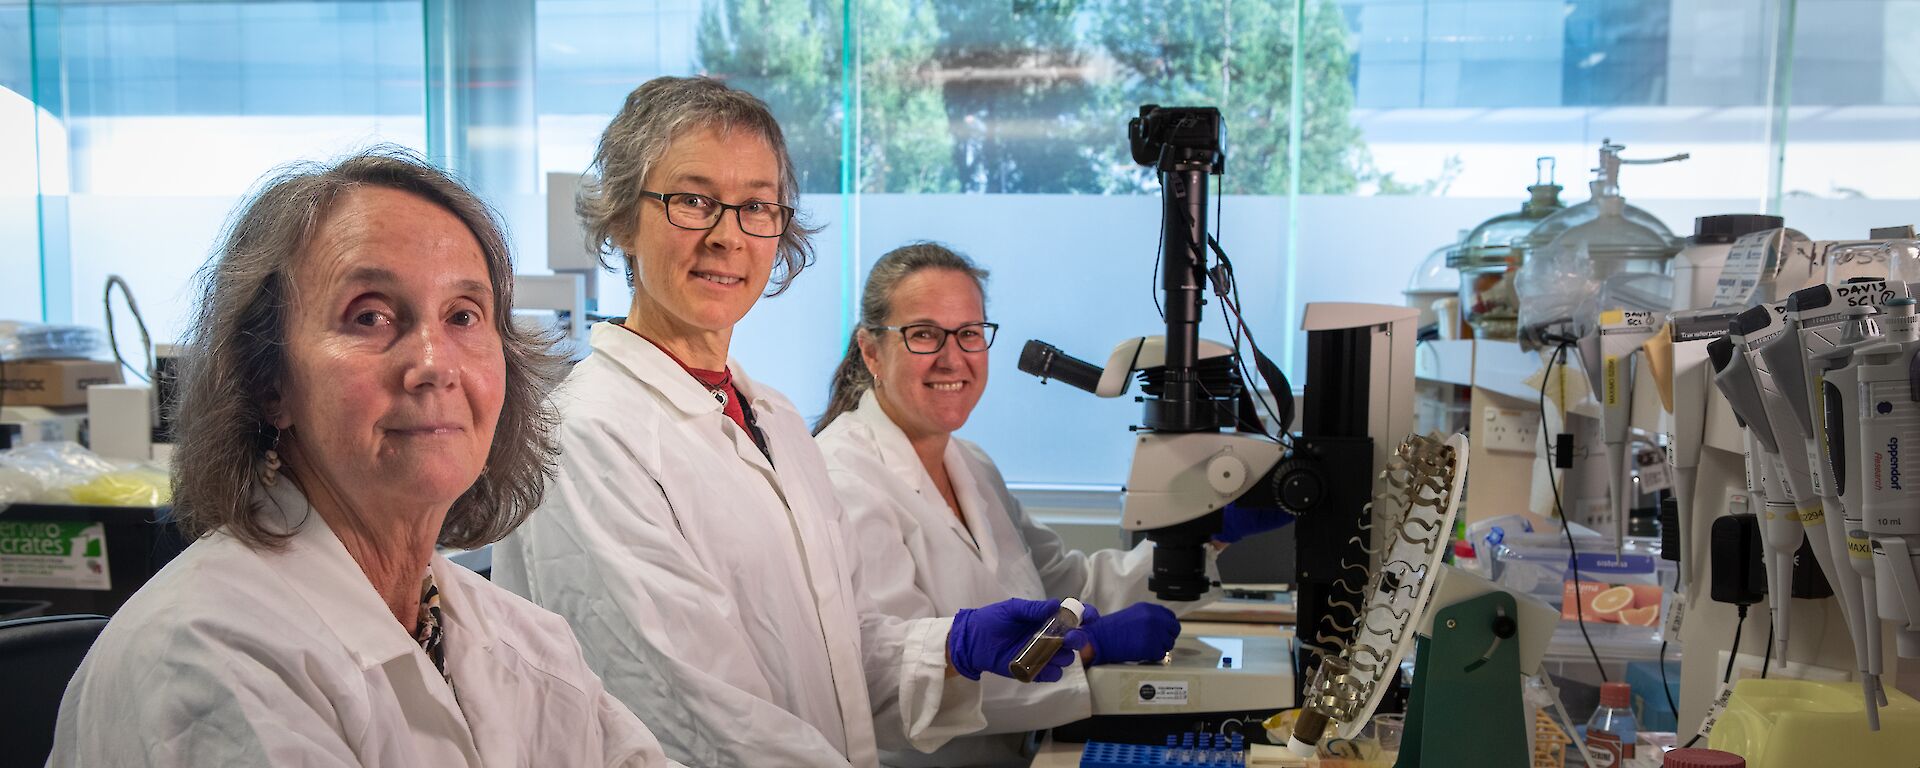 Three women scientists in lab coats at a research bench.